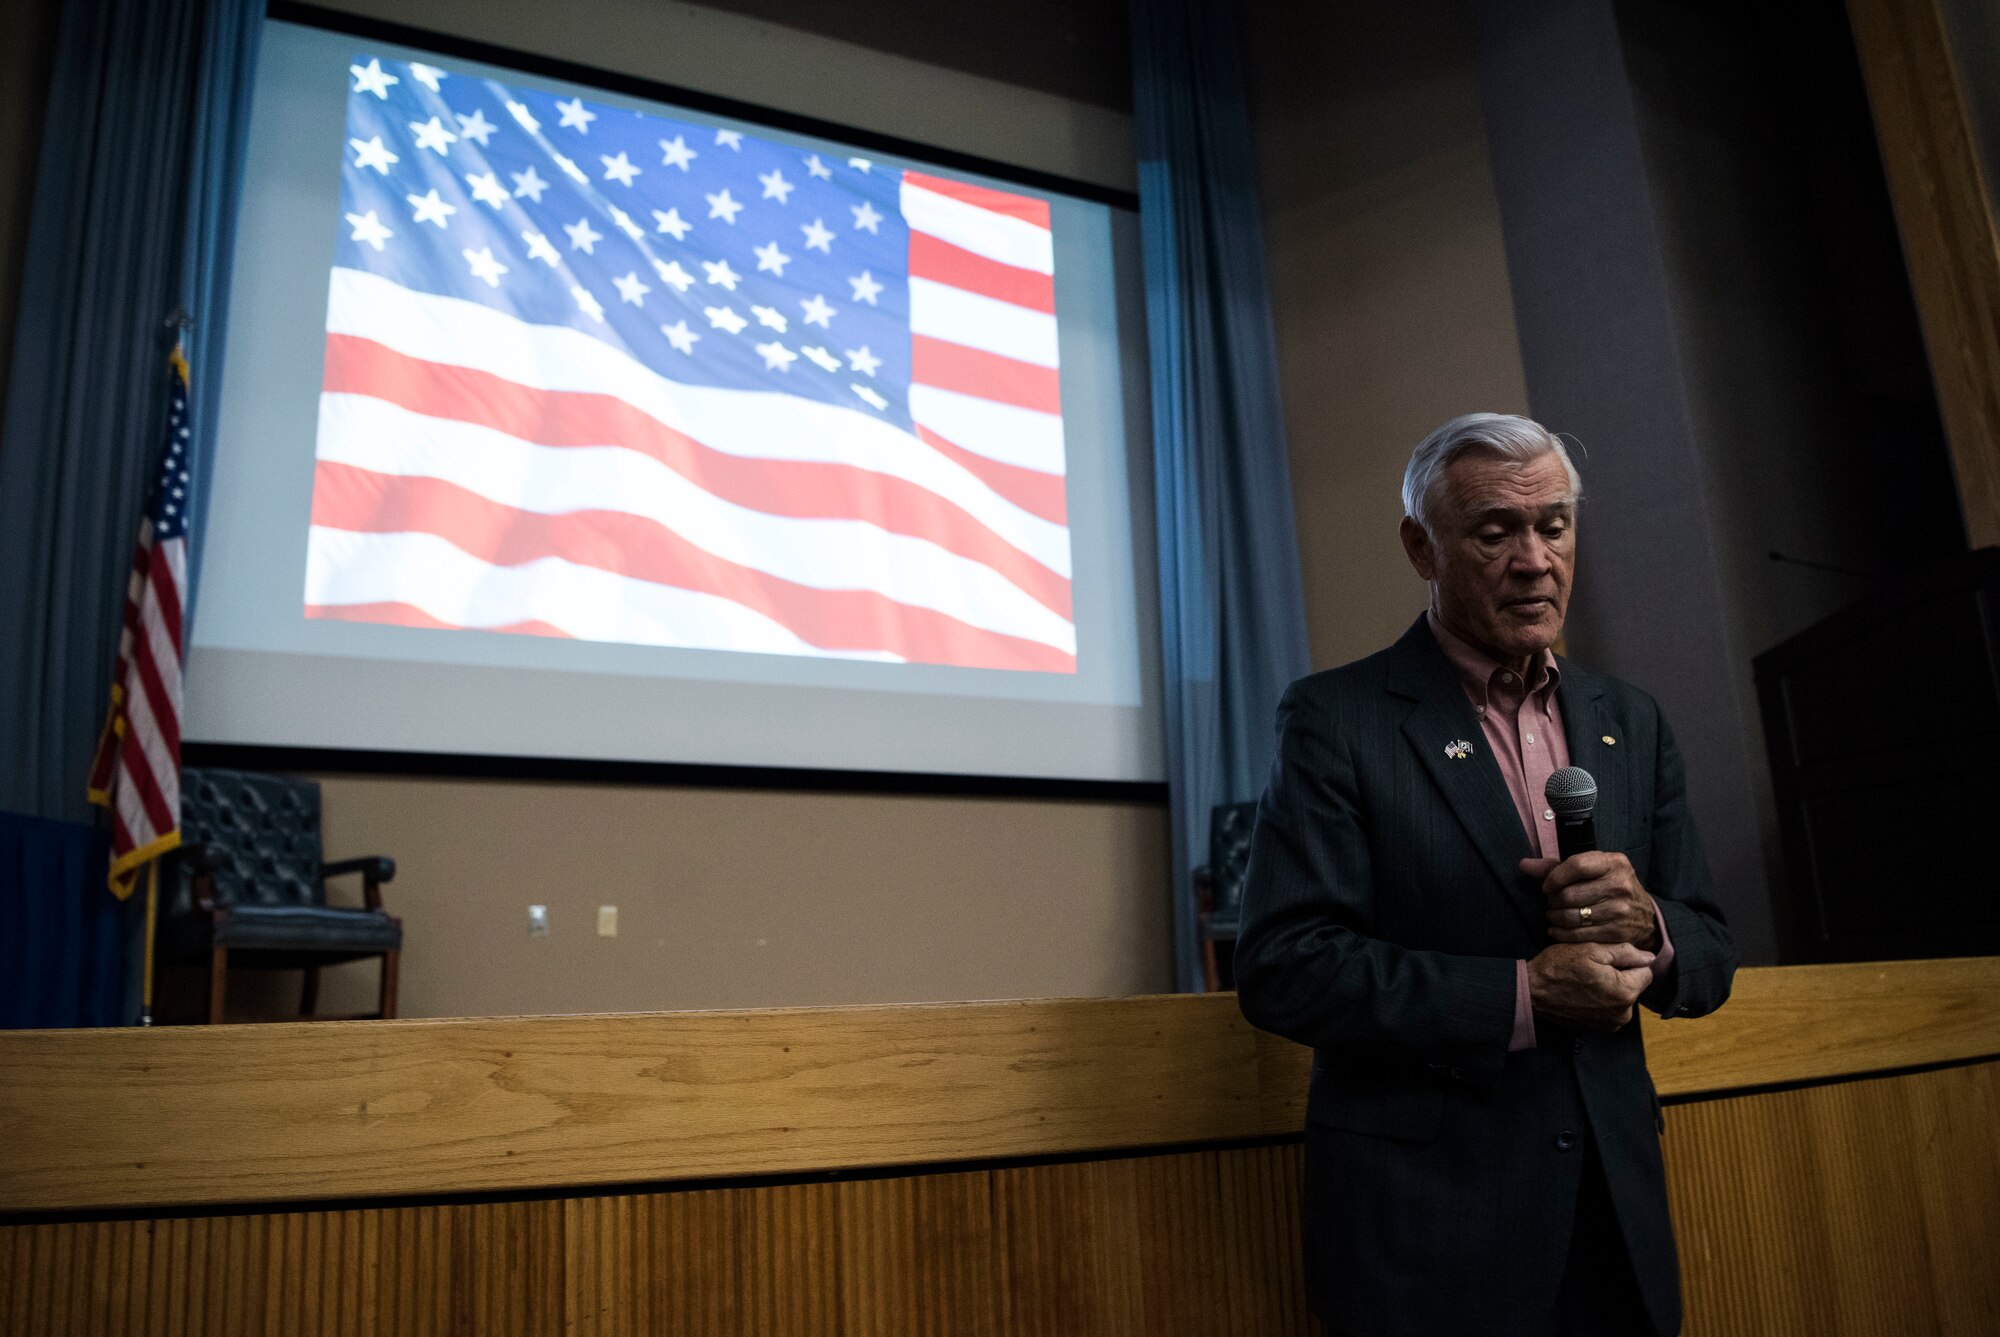 U.S. Air Force retired Lt. Col. Barry Bridger, former Prisoner of War, gives his closing remarks at Laughlin Air Force Base, Texas, Oct. 23, 2019. Bridger spoke to members of Team XL about his time as a POW in the infamous Hanoi Hilton. (U.S. Air Force photo by Senior Airman Marco A. Gomez)